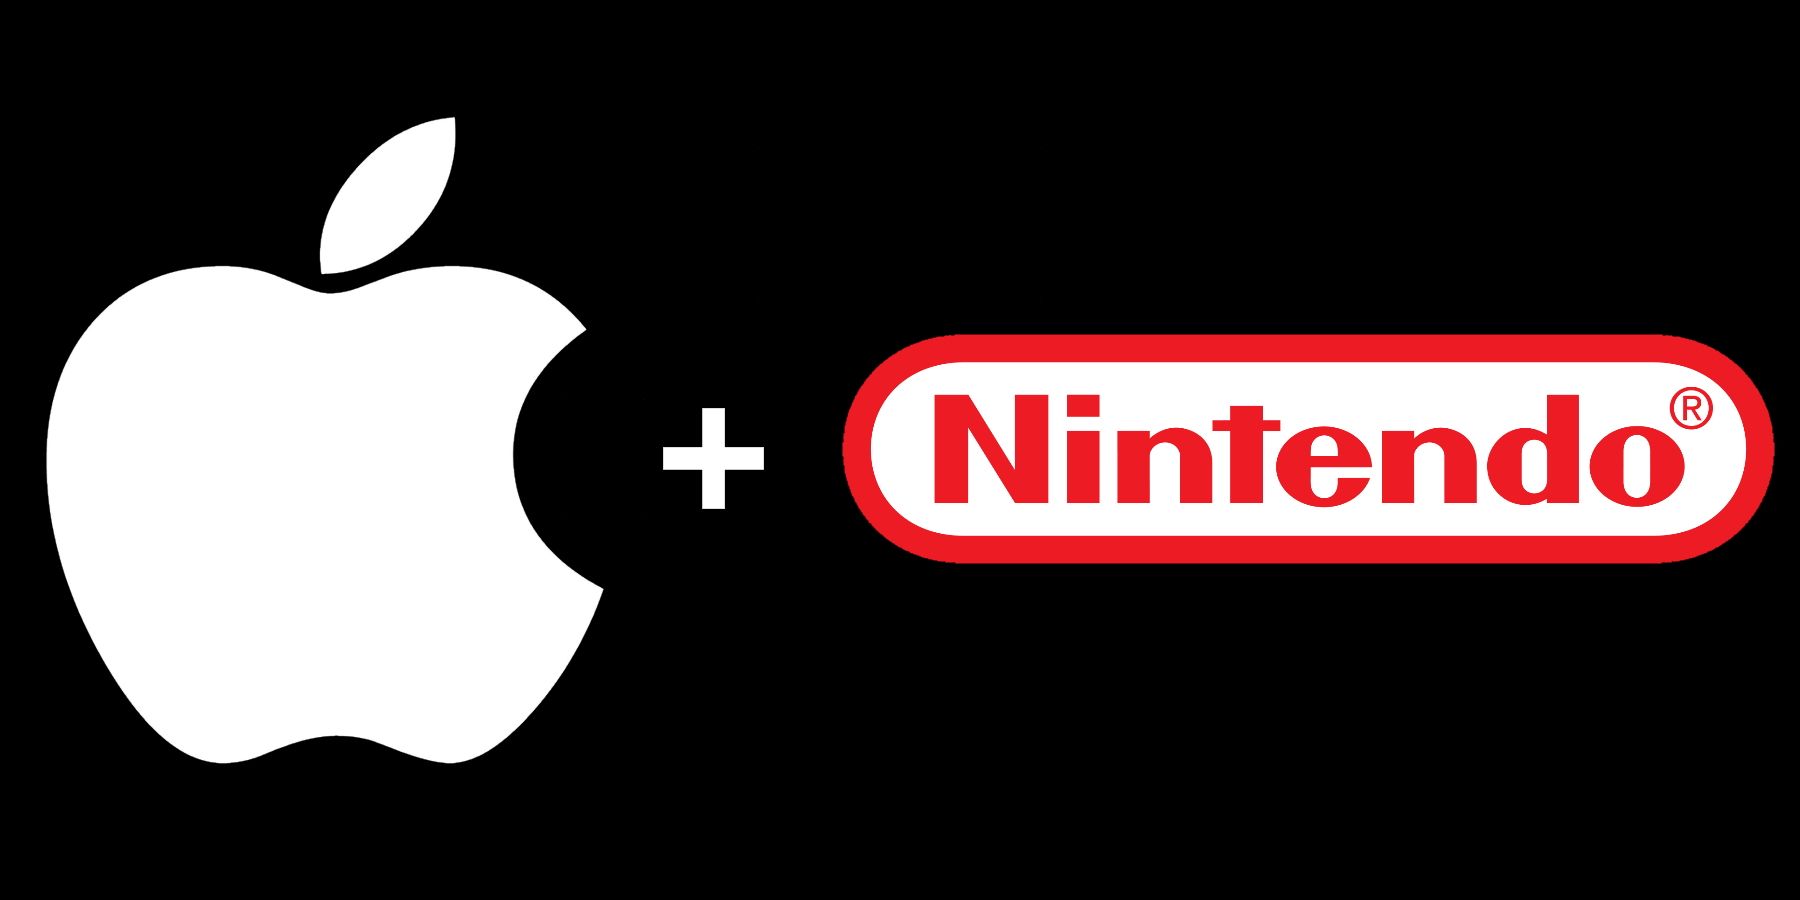 Logos for Apple and Nintendo